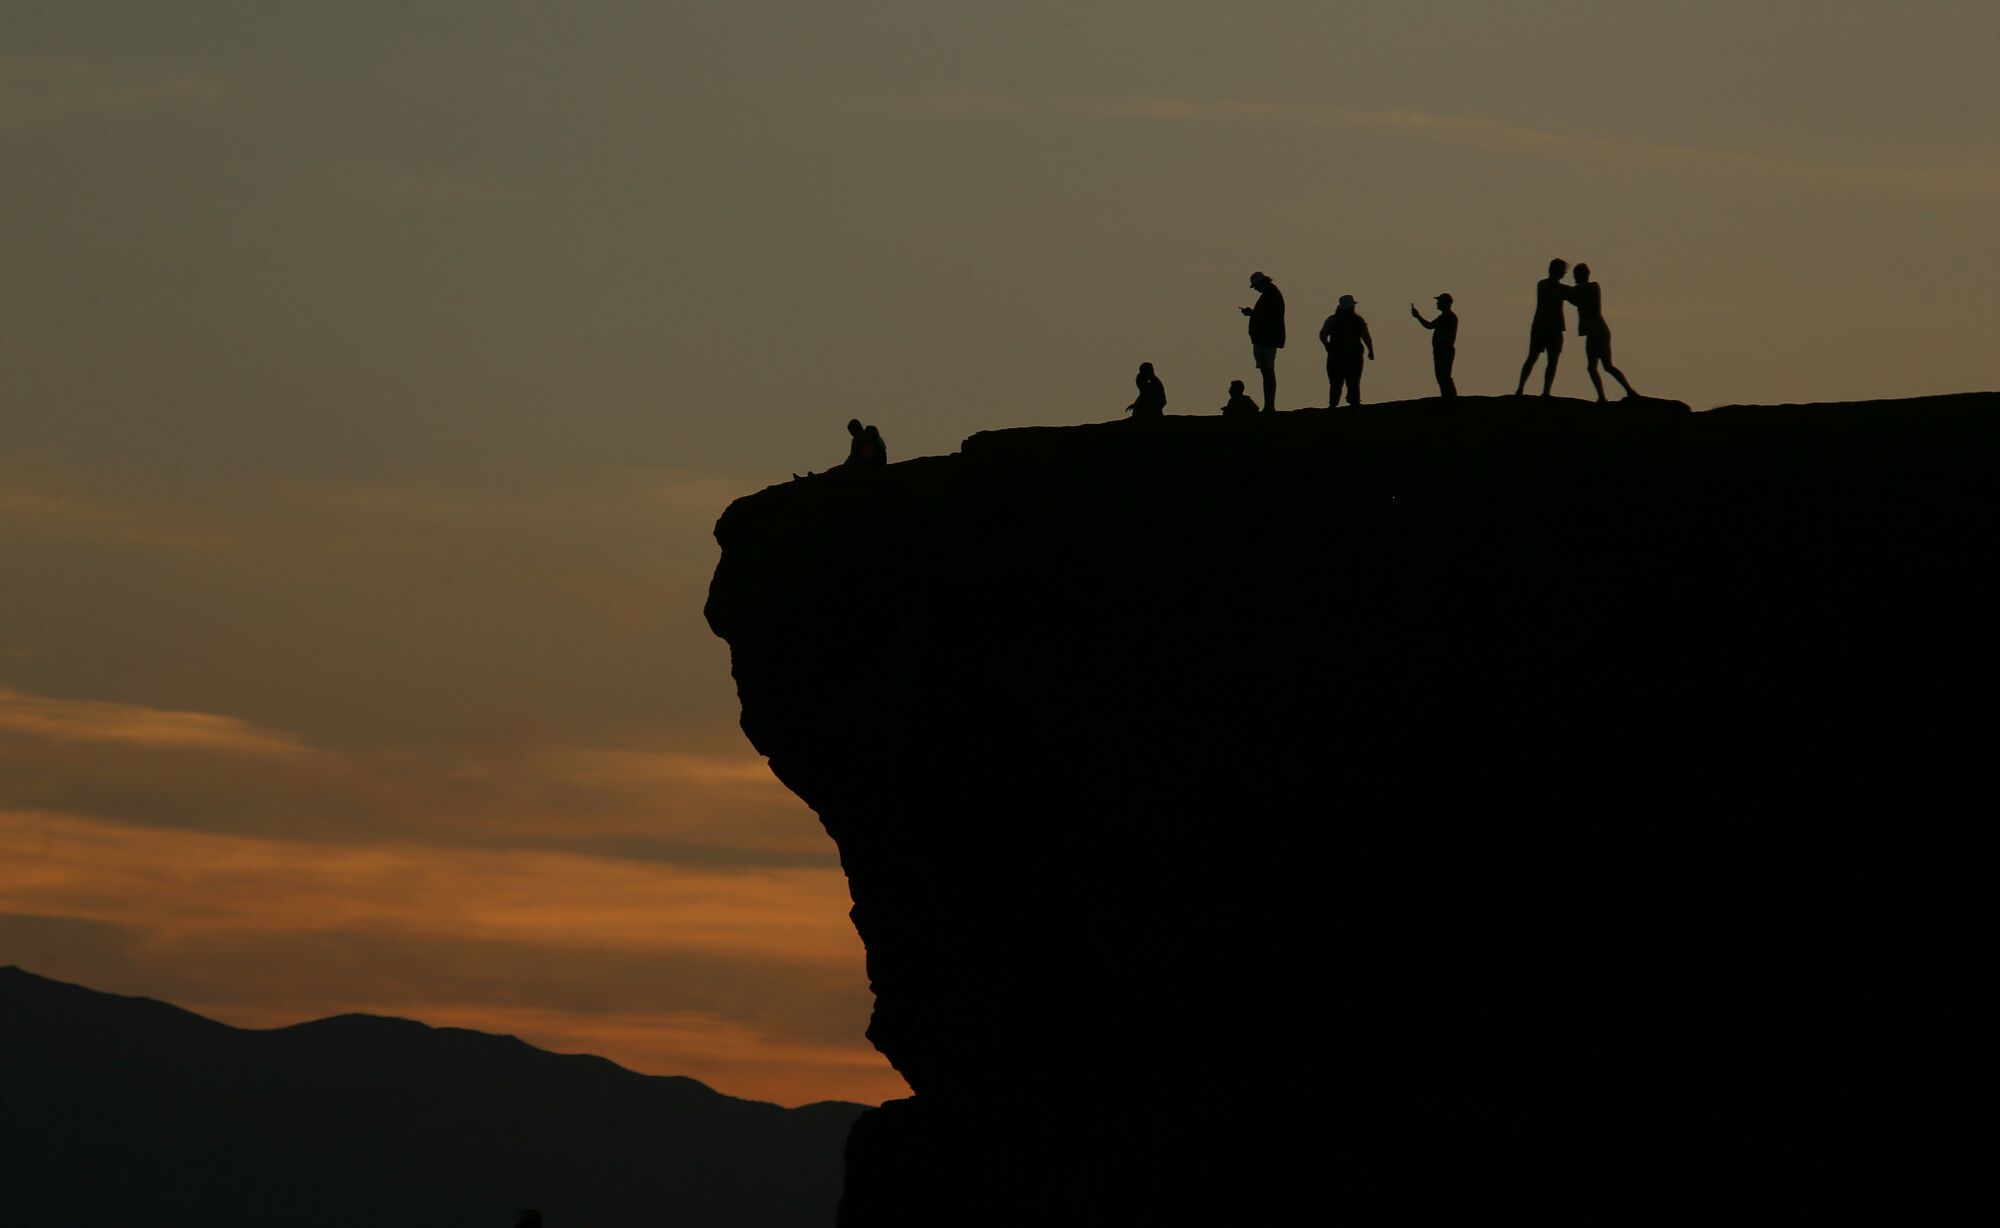 Locals watch the sunset from atop a bluff in St. George, Utah, one of the fastest-growing metropolitan areas in the nation.